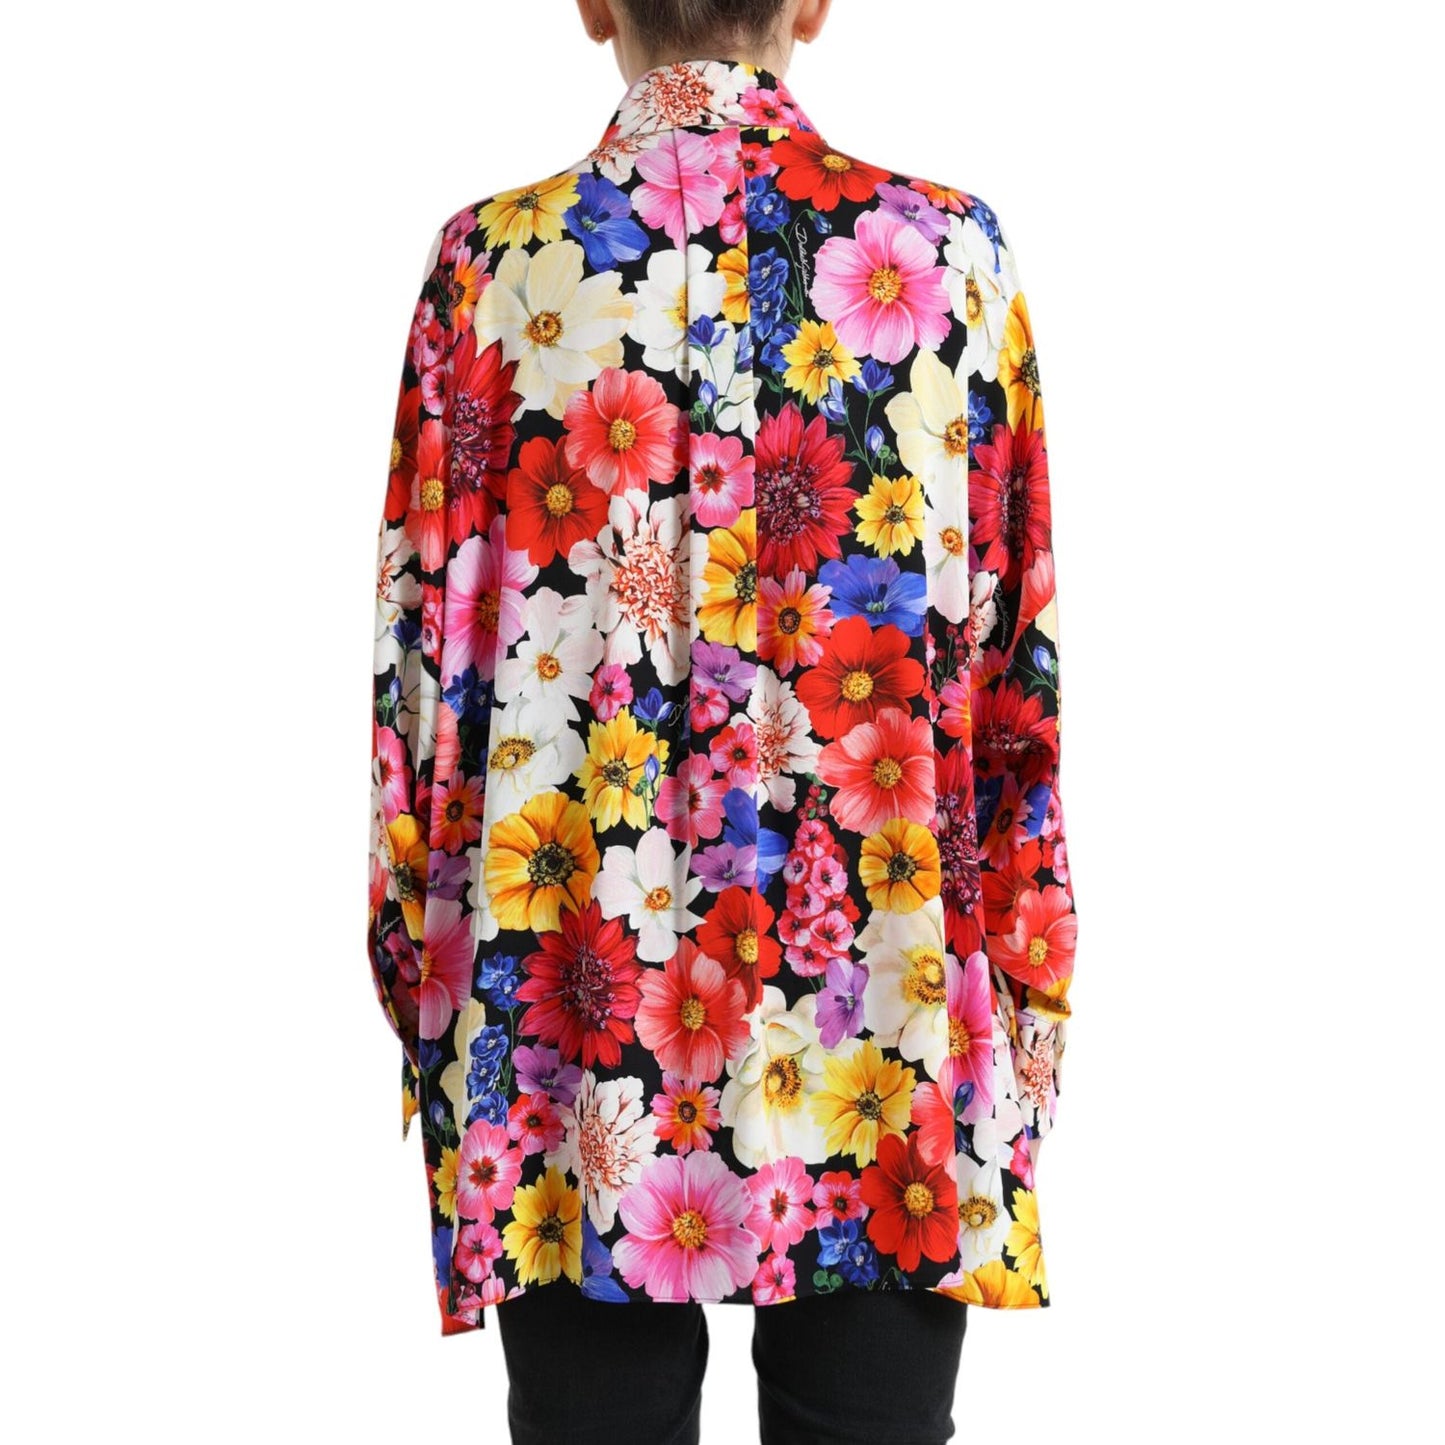 Dolce & Gabbana Floral Silk Blouse with Front Tie Fastening multicolor-floral-ascot-collared-blouse-top